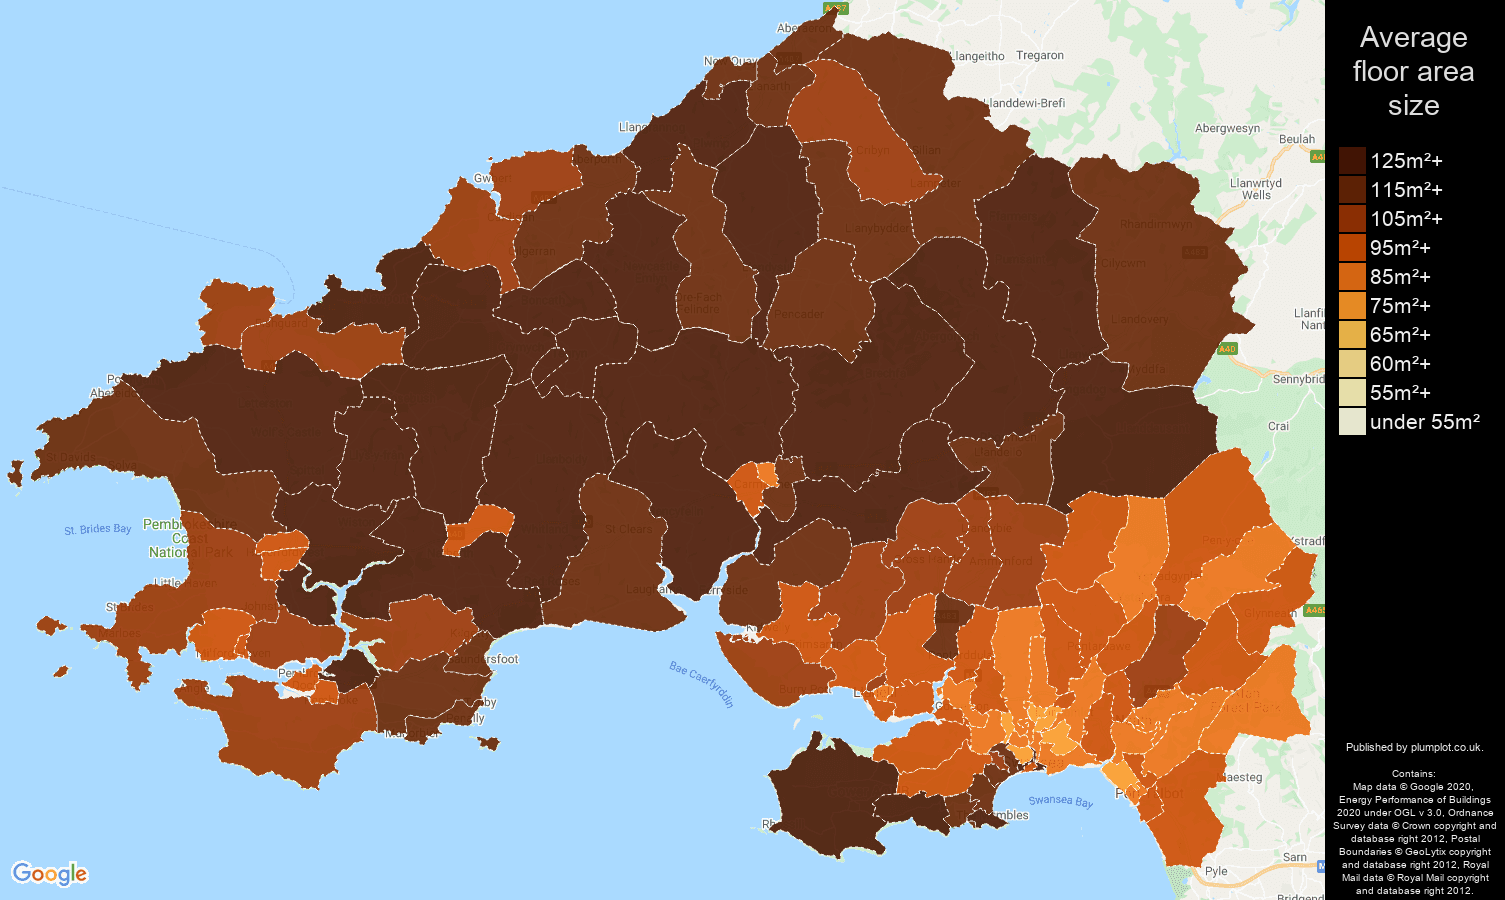 Swansea map of average floor area size of houses